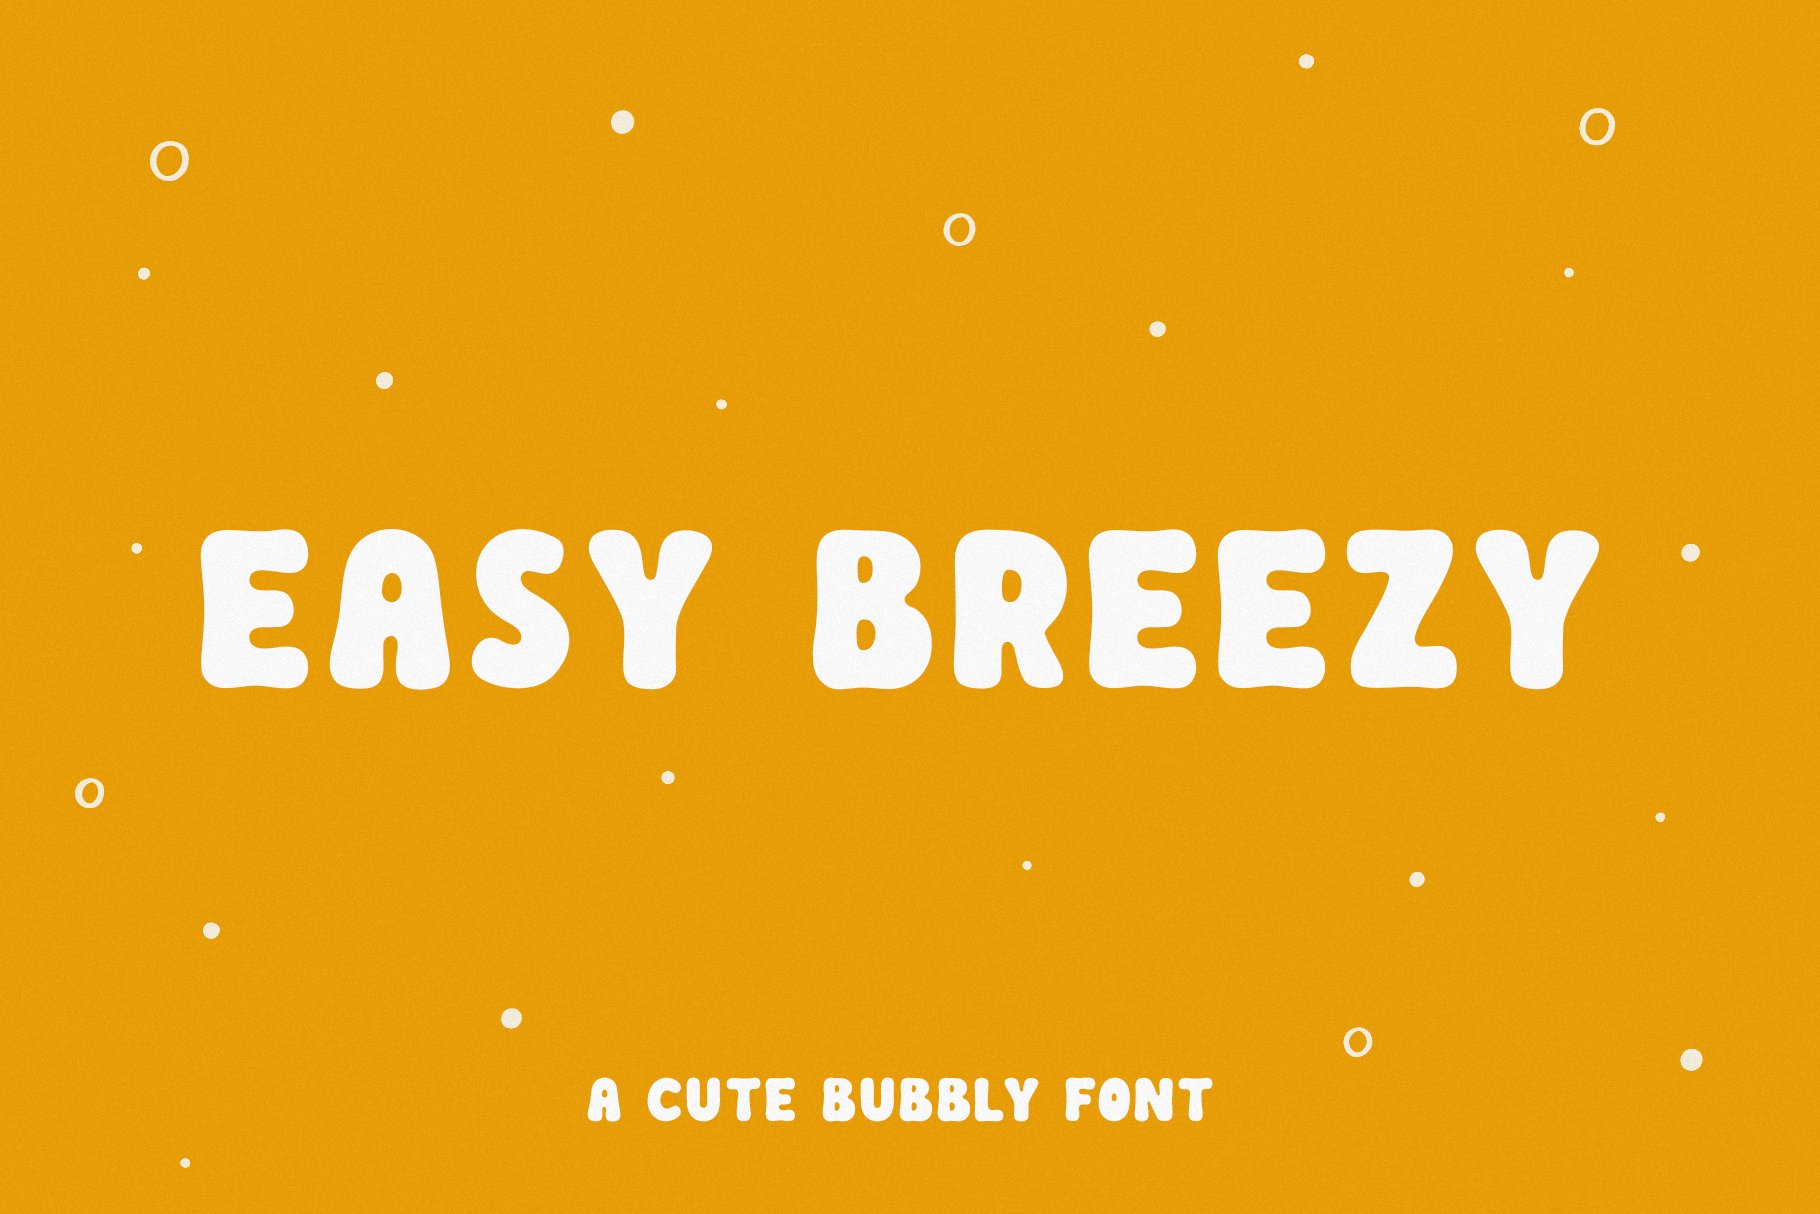 Easy breezy - a cute bubbly font cover image.